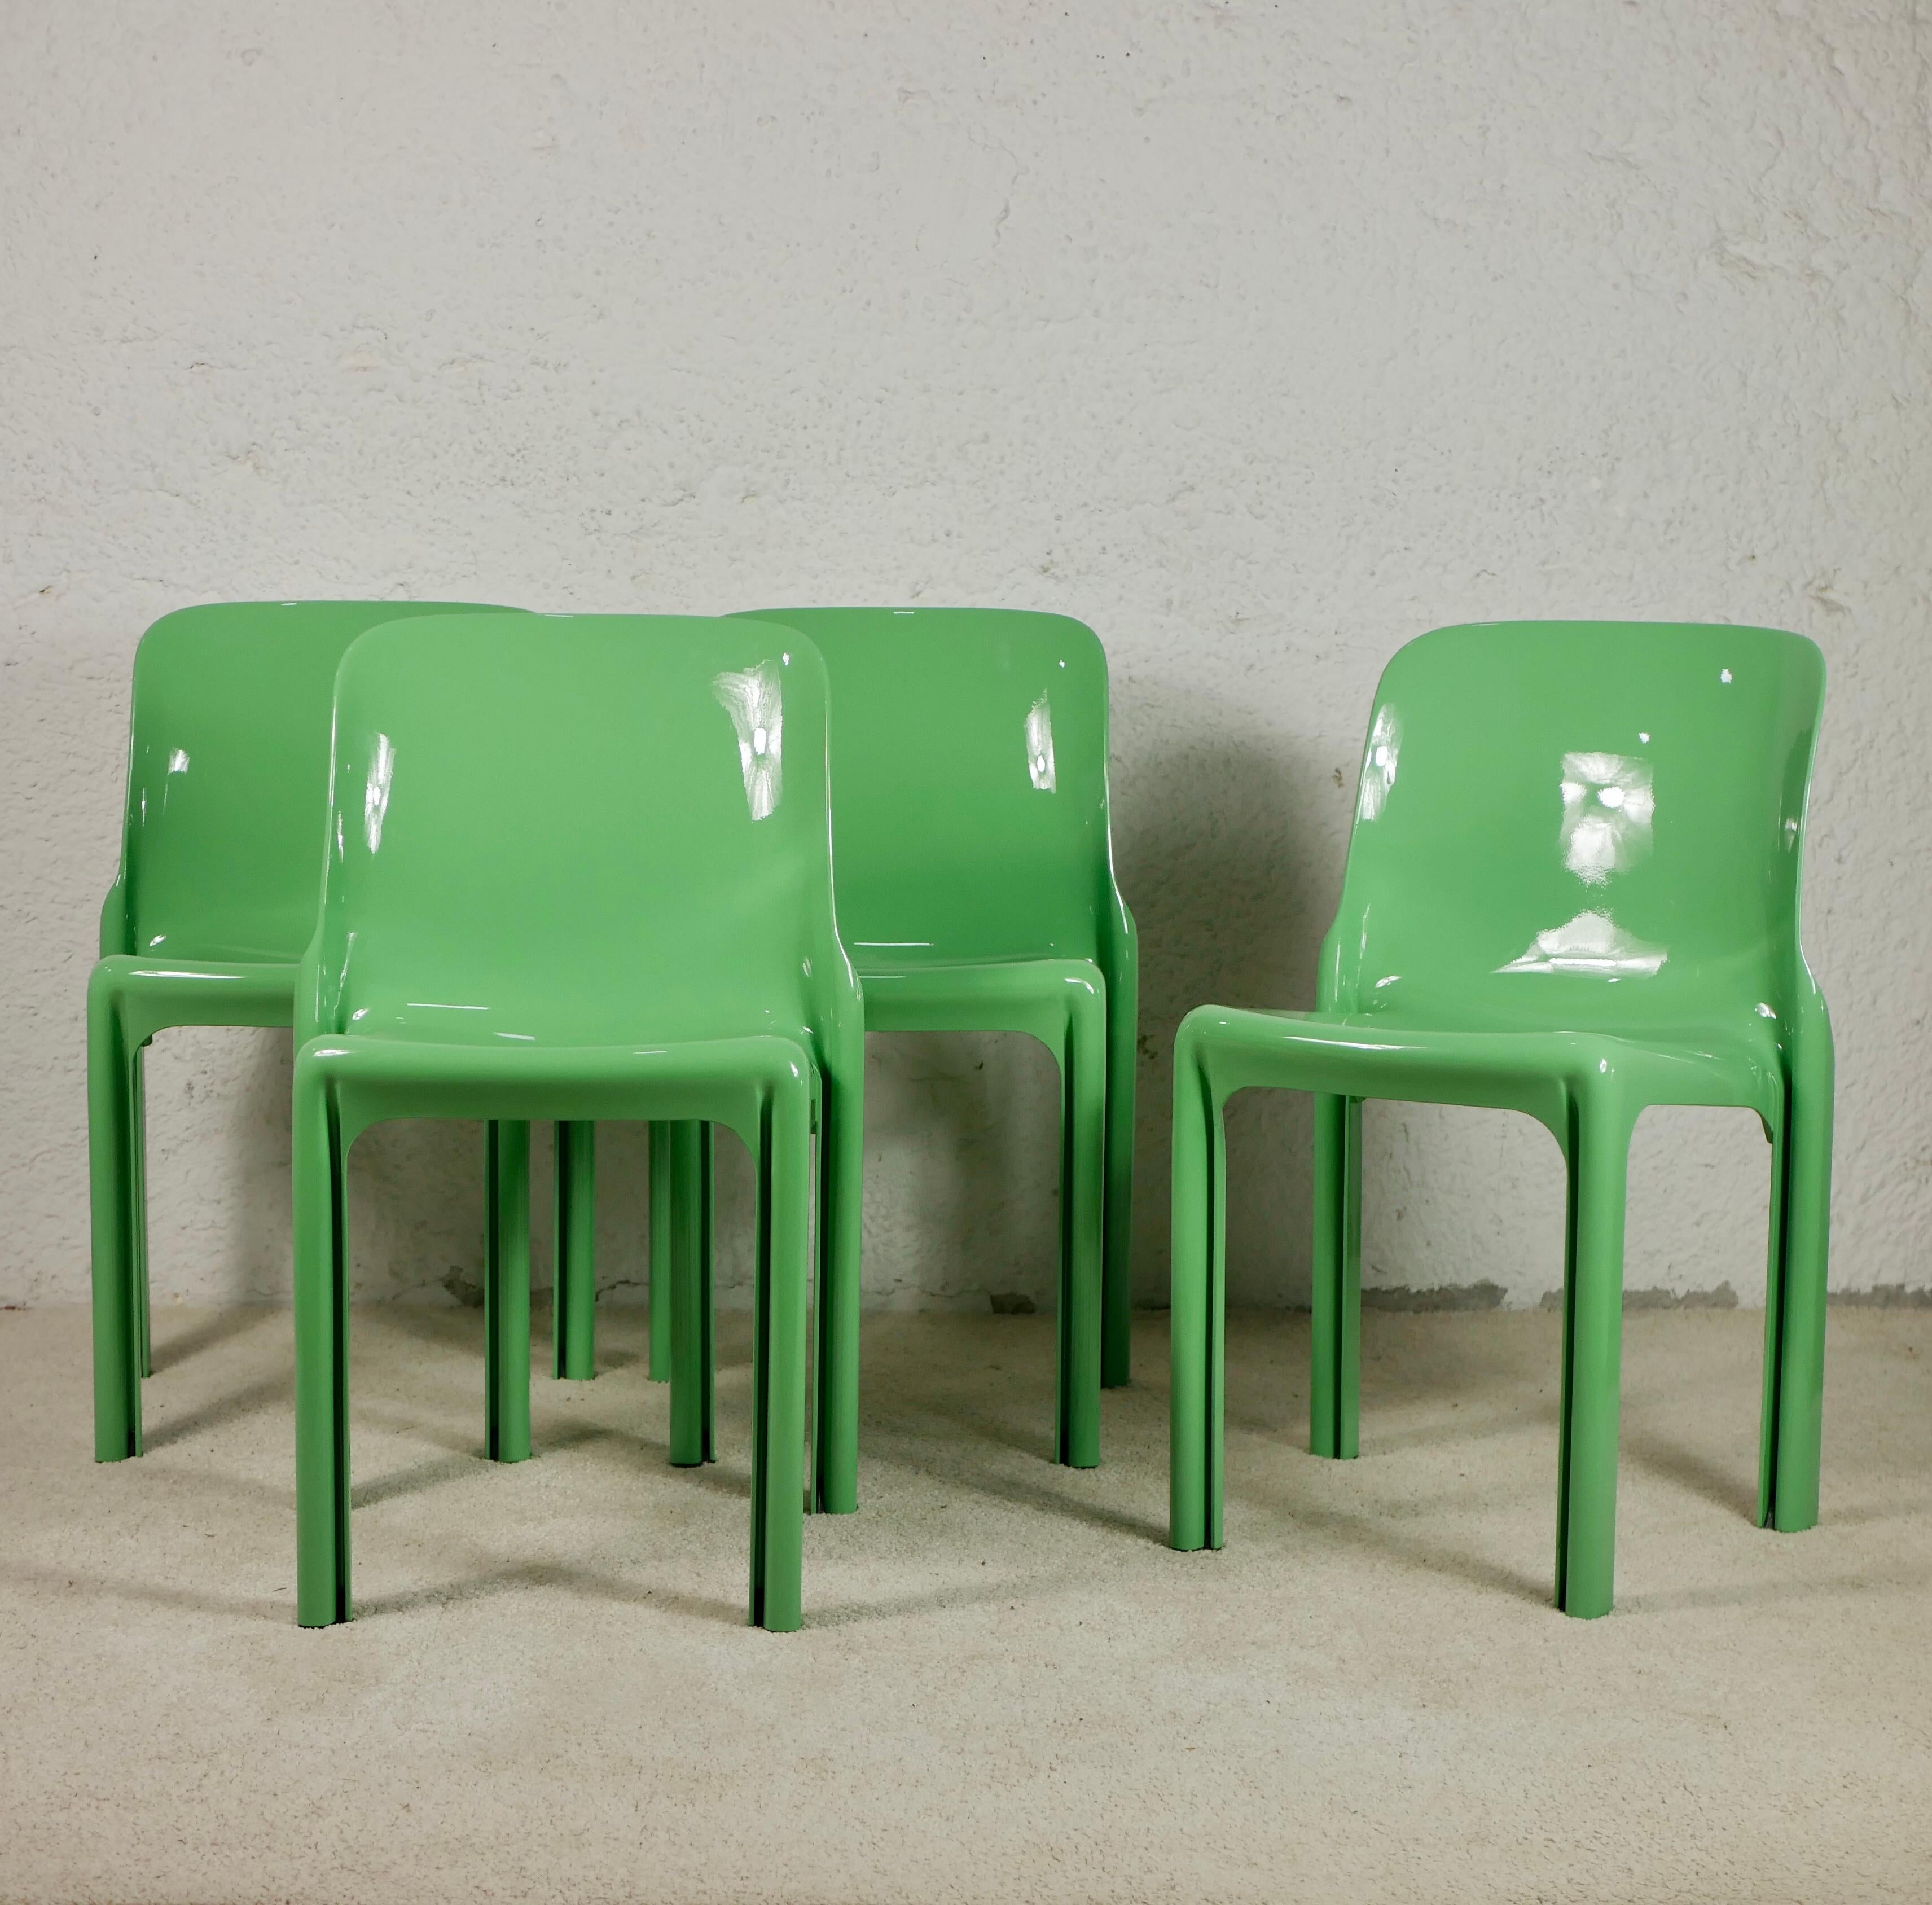 Set of 4 pistachio green chairs, Selene model, by Vico Magistretti for Artemide.
Designed in 1966 by the Italian master, the Selene is a stackable and lightweight chair, with S-shaped foot which give sturdiness and stability without adding material